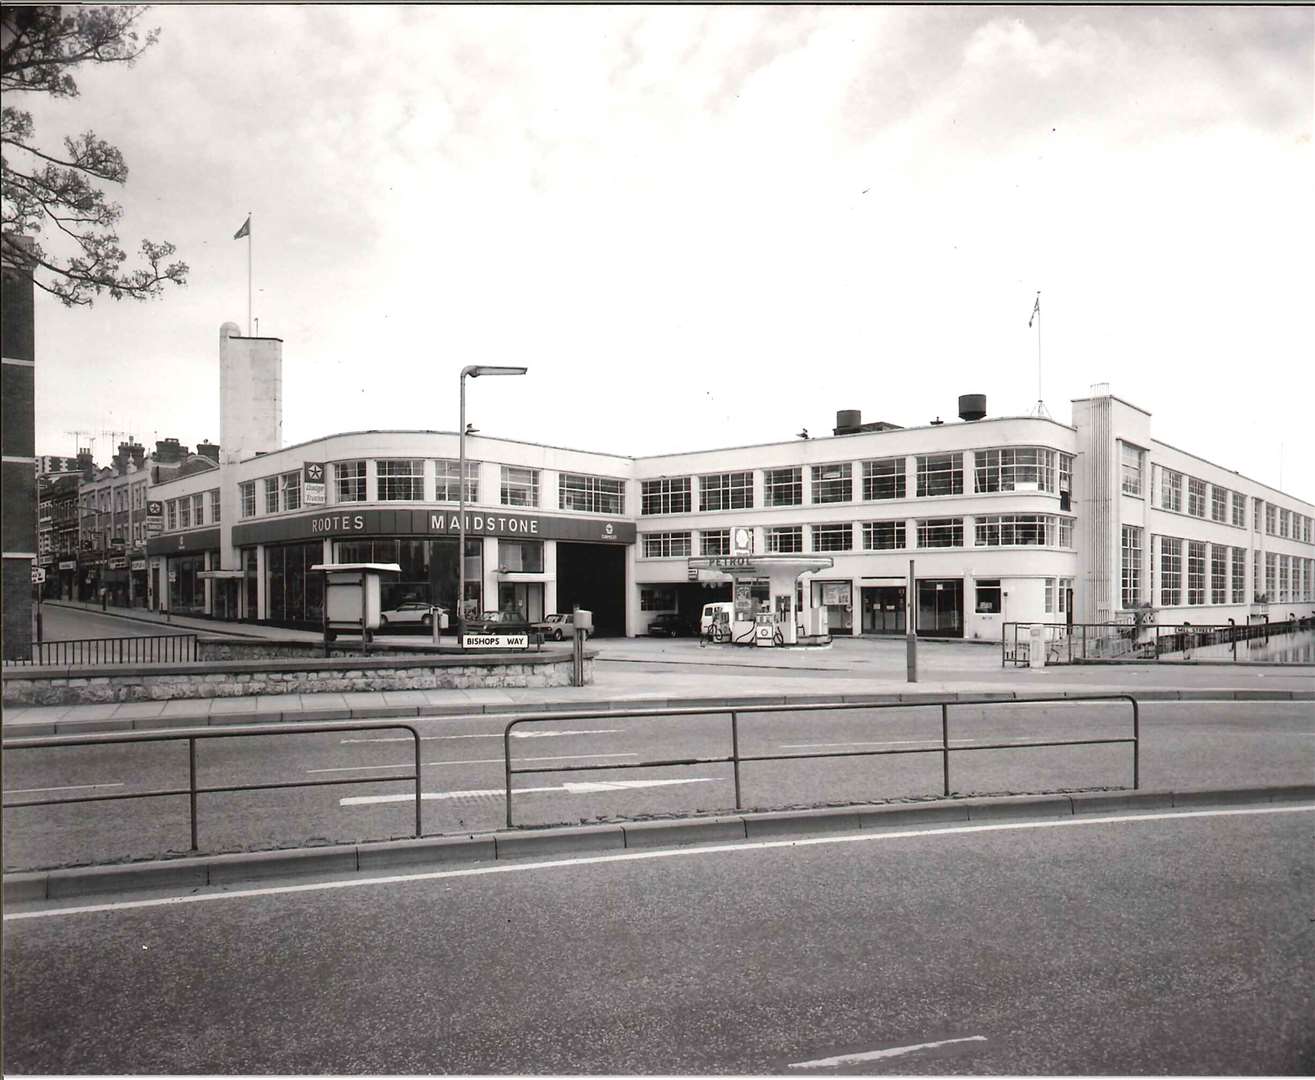 The petrol pumping station at Rootes in Mill Street, Maidstone, in the 1960s